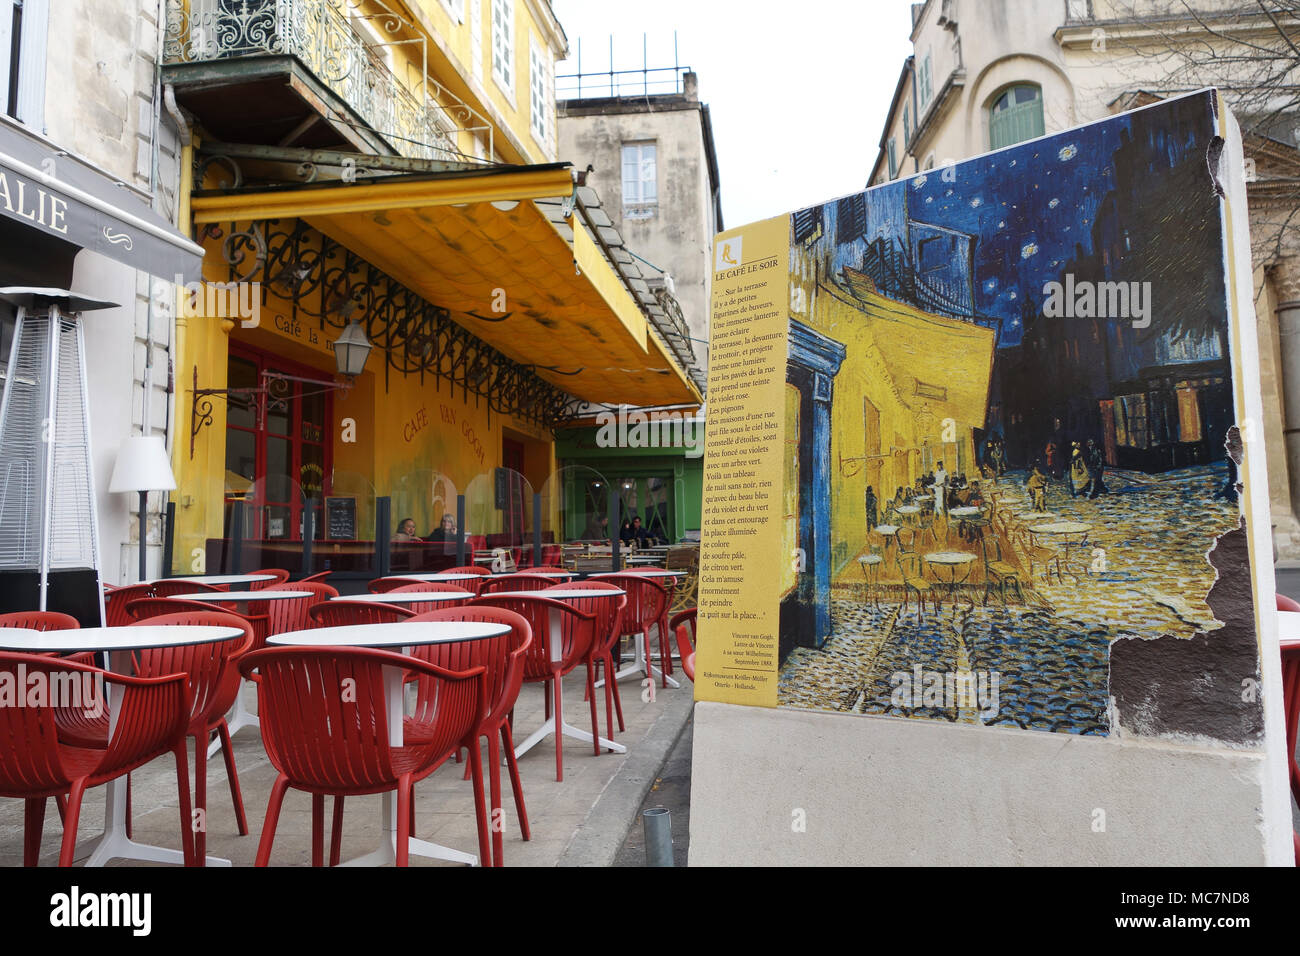 'Le Cafe le Soir' which Vincent Van Gogh painted in 1888 Stock Photo